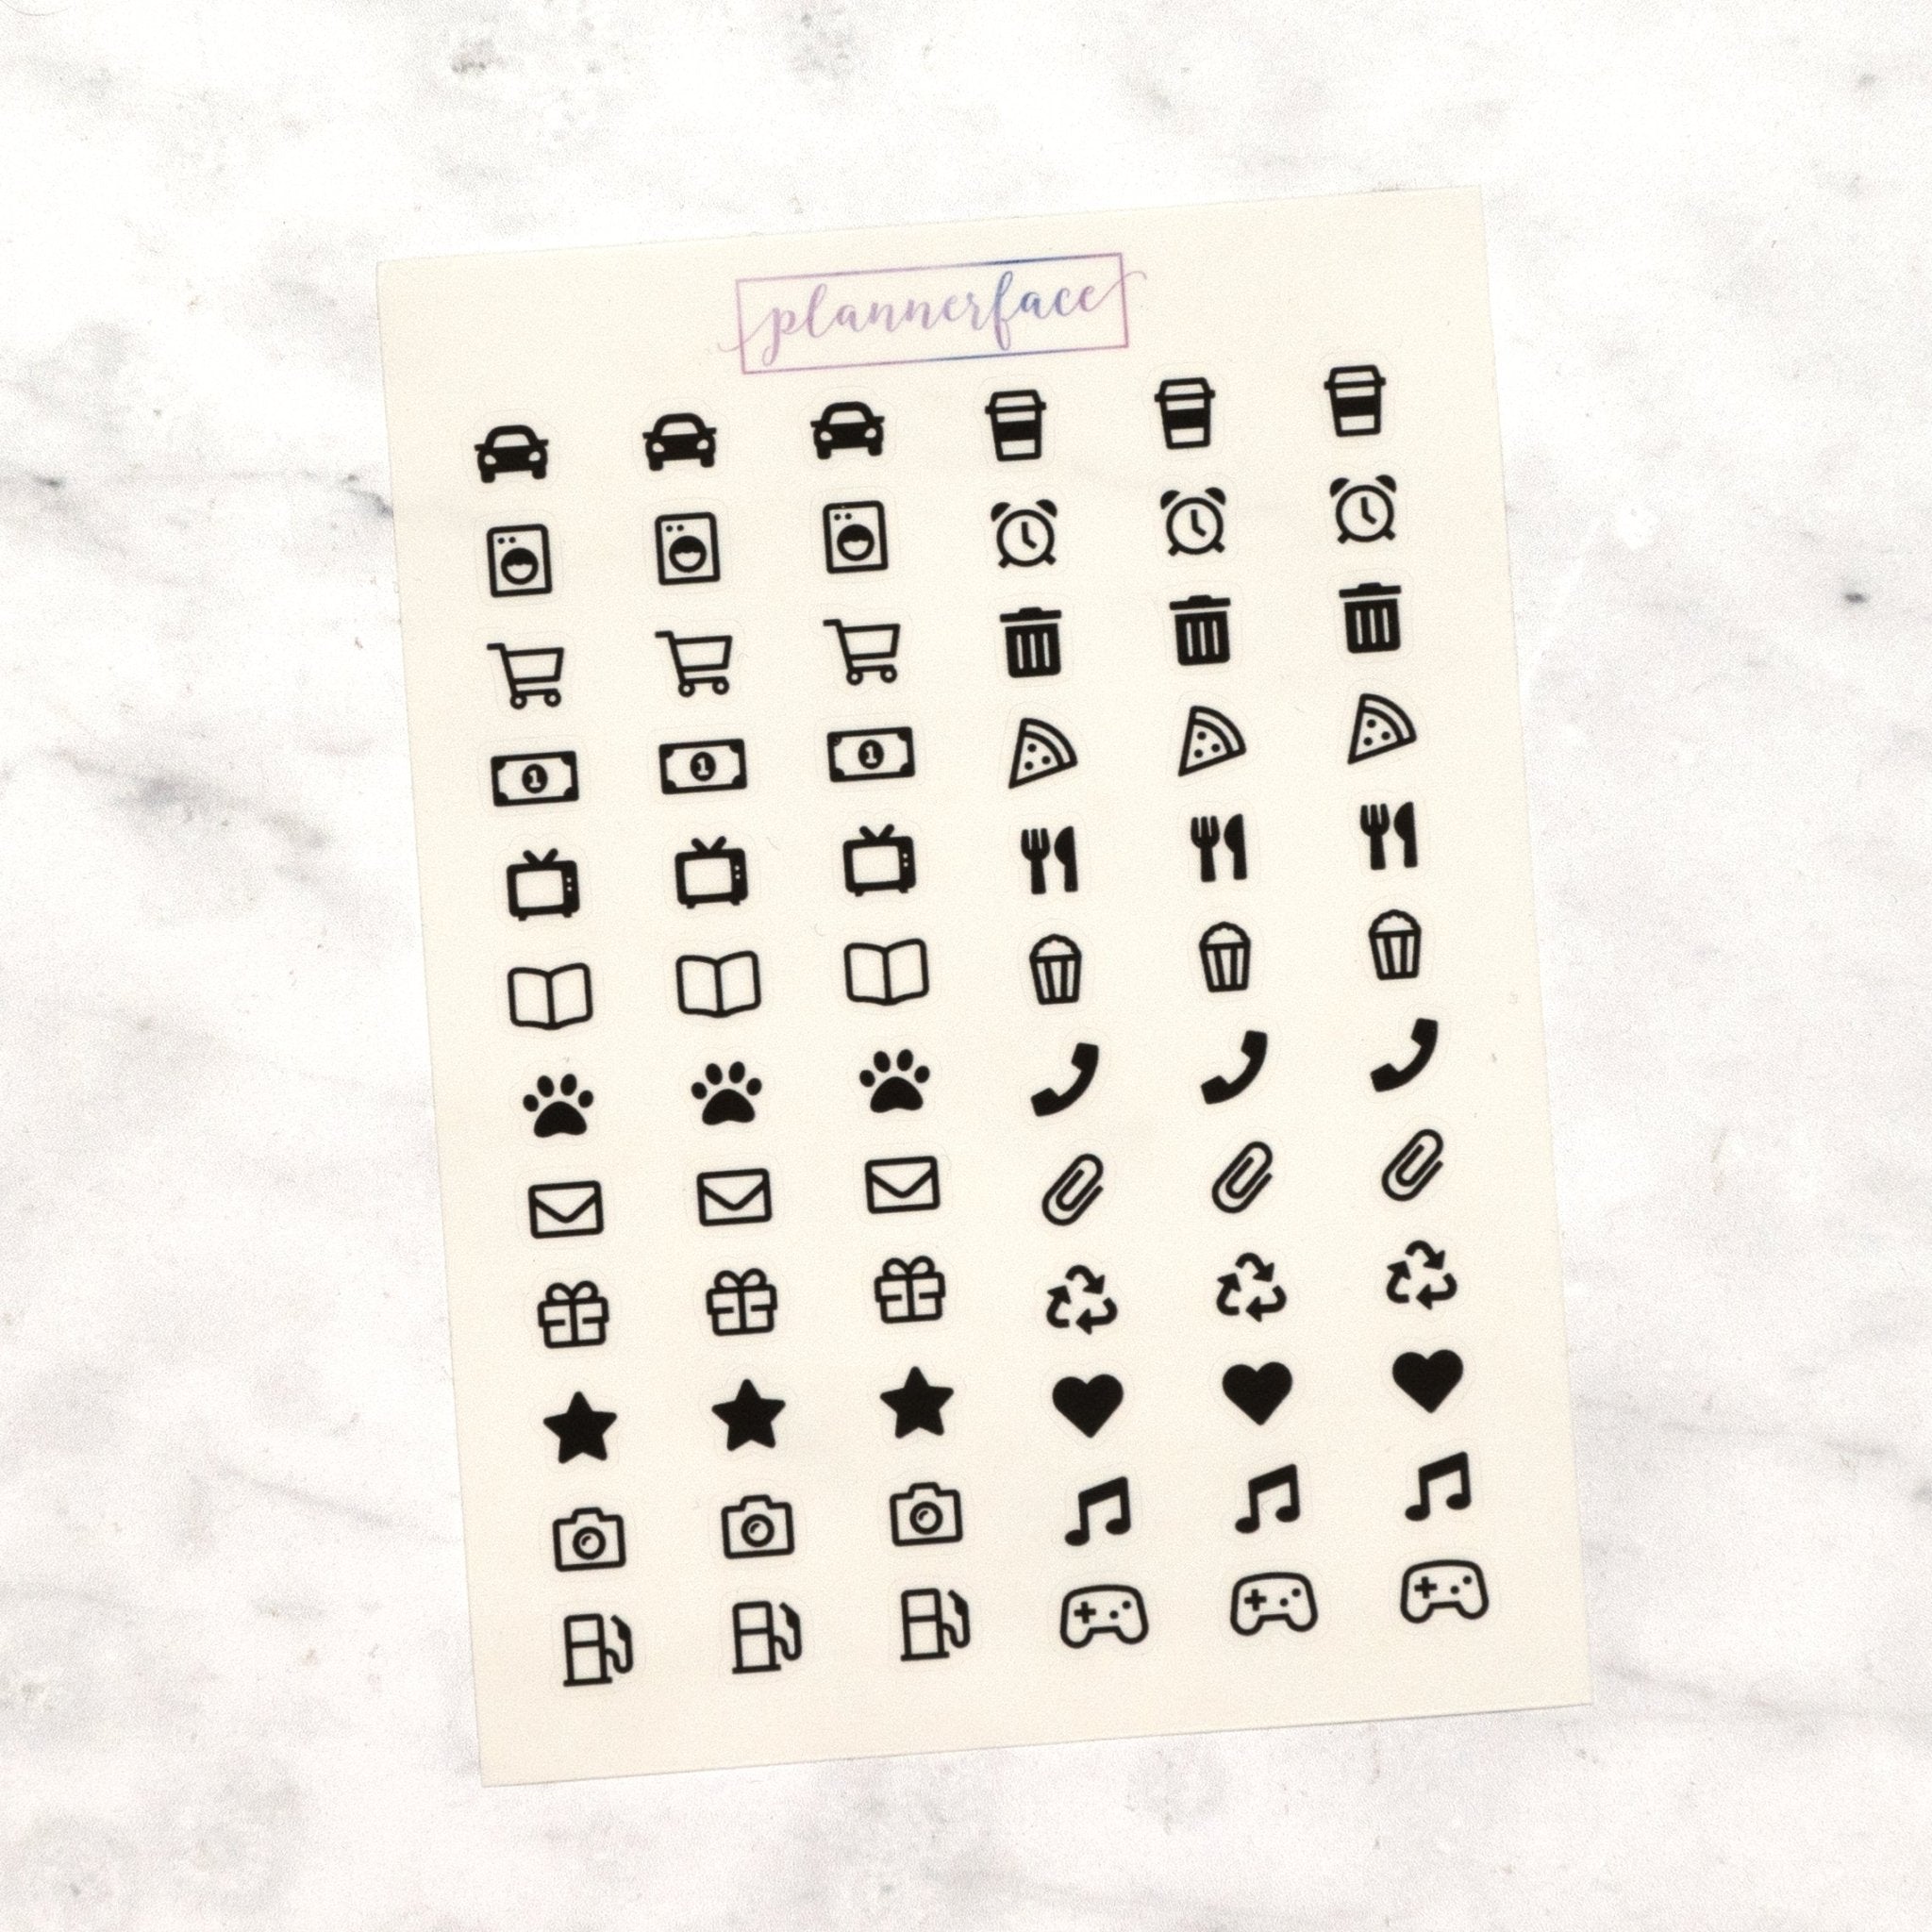 Transparent Icon Sticker Sampler by Plannerface